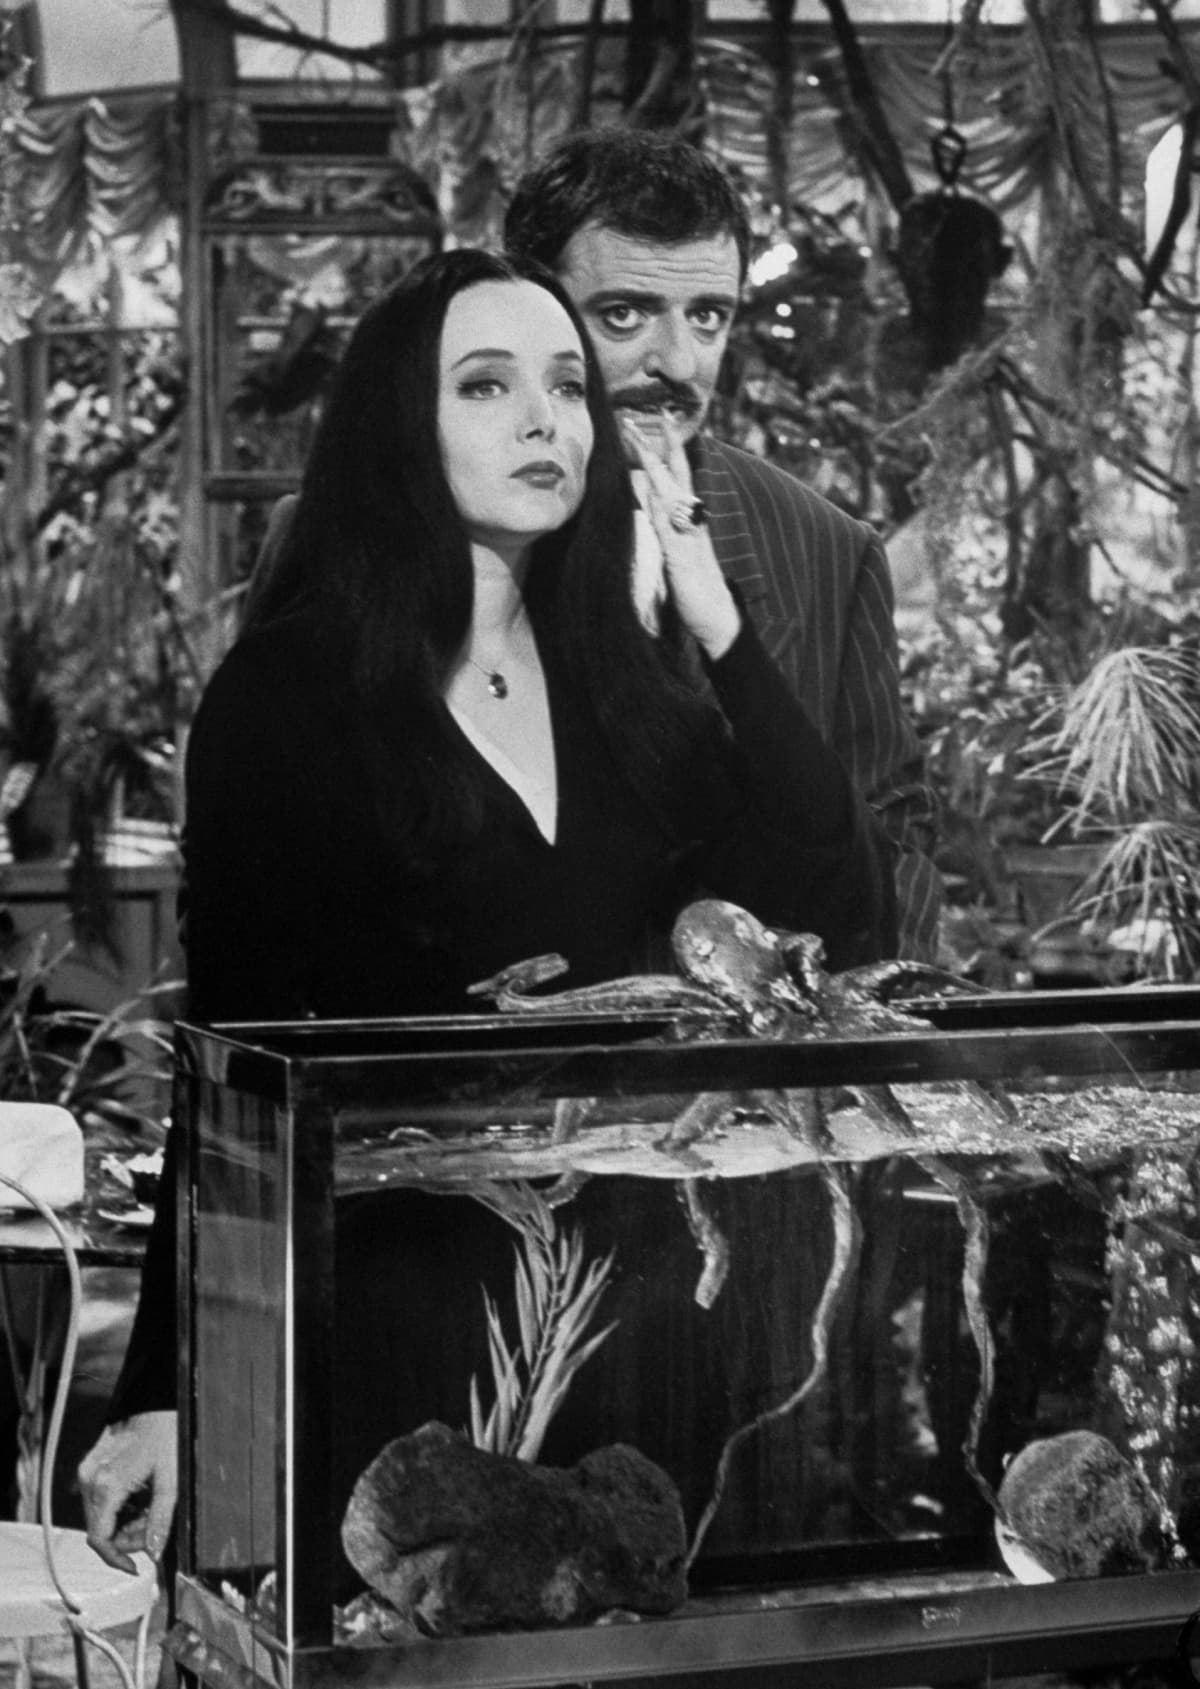 Carolyn Jones (C, sitting) and John Astin (L), with other cast members, during scene from program The Addams Family.    (Photo by Don Cravens/Getty Images)